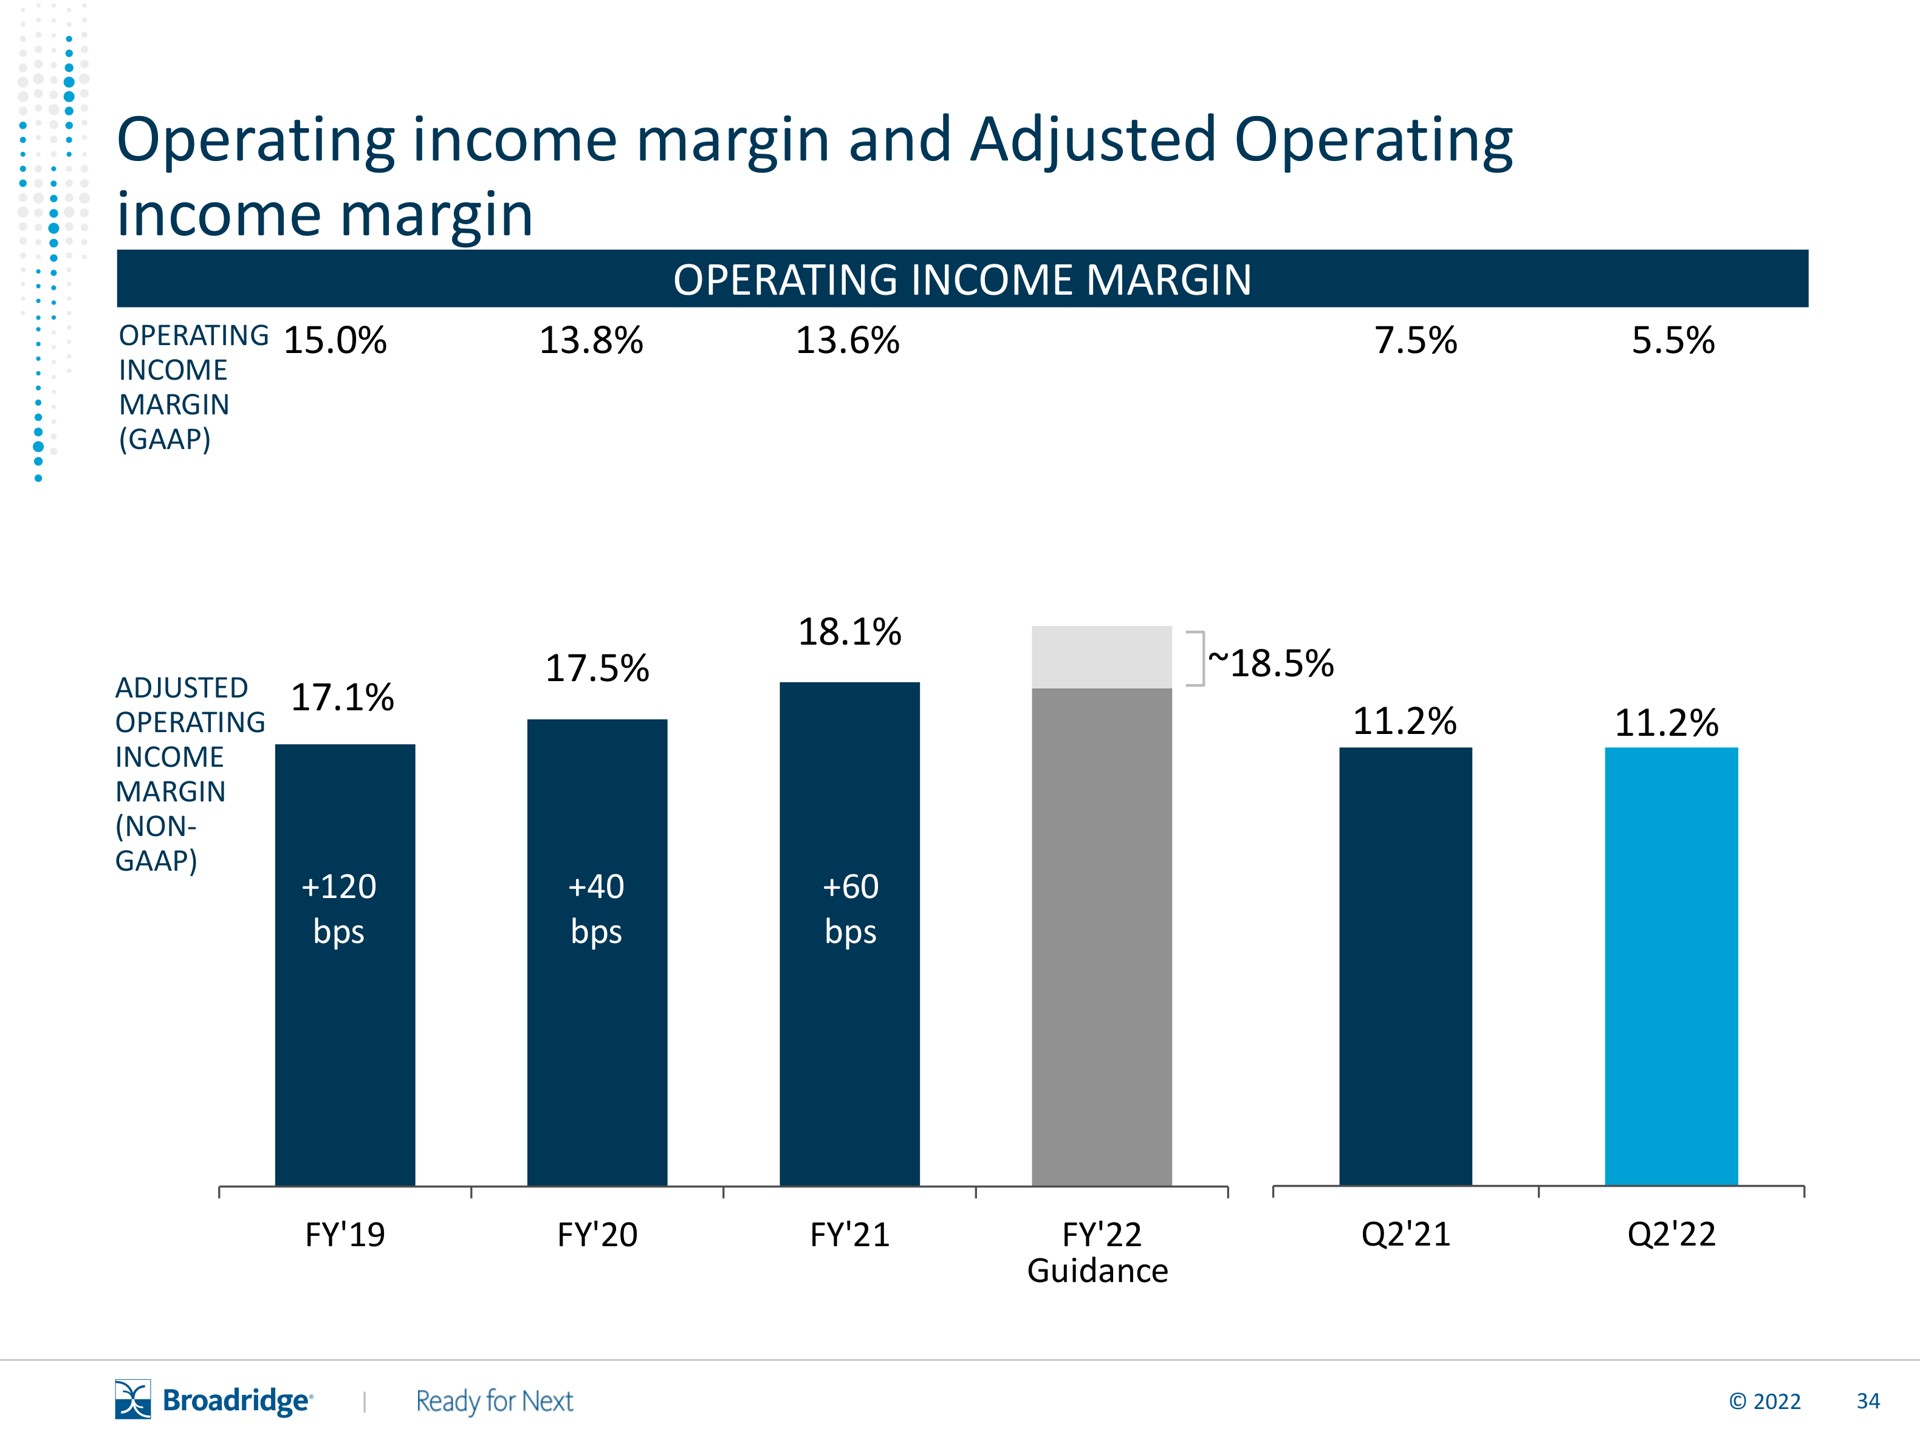 operating income margin and adjusted operating income margin | Broadridge Financial Solutions